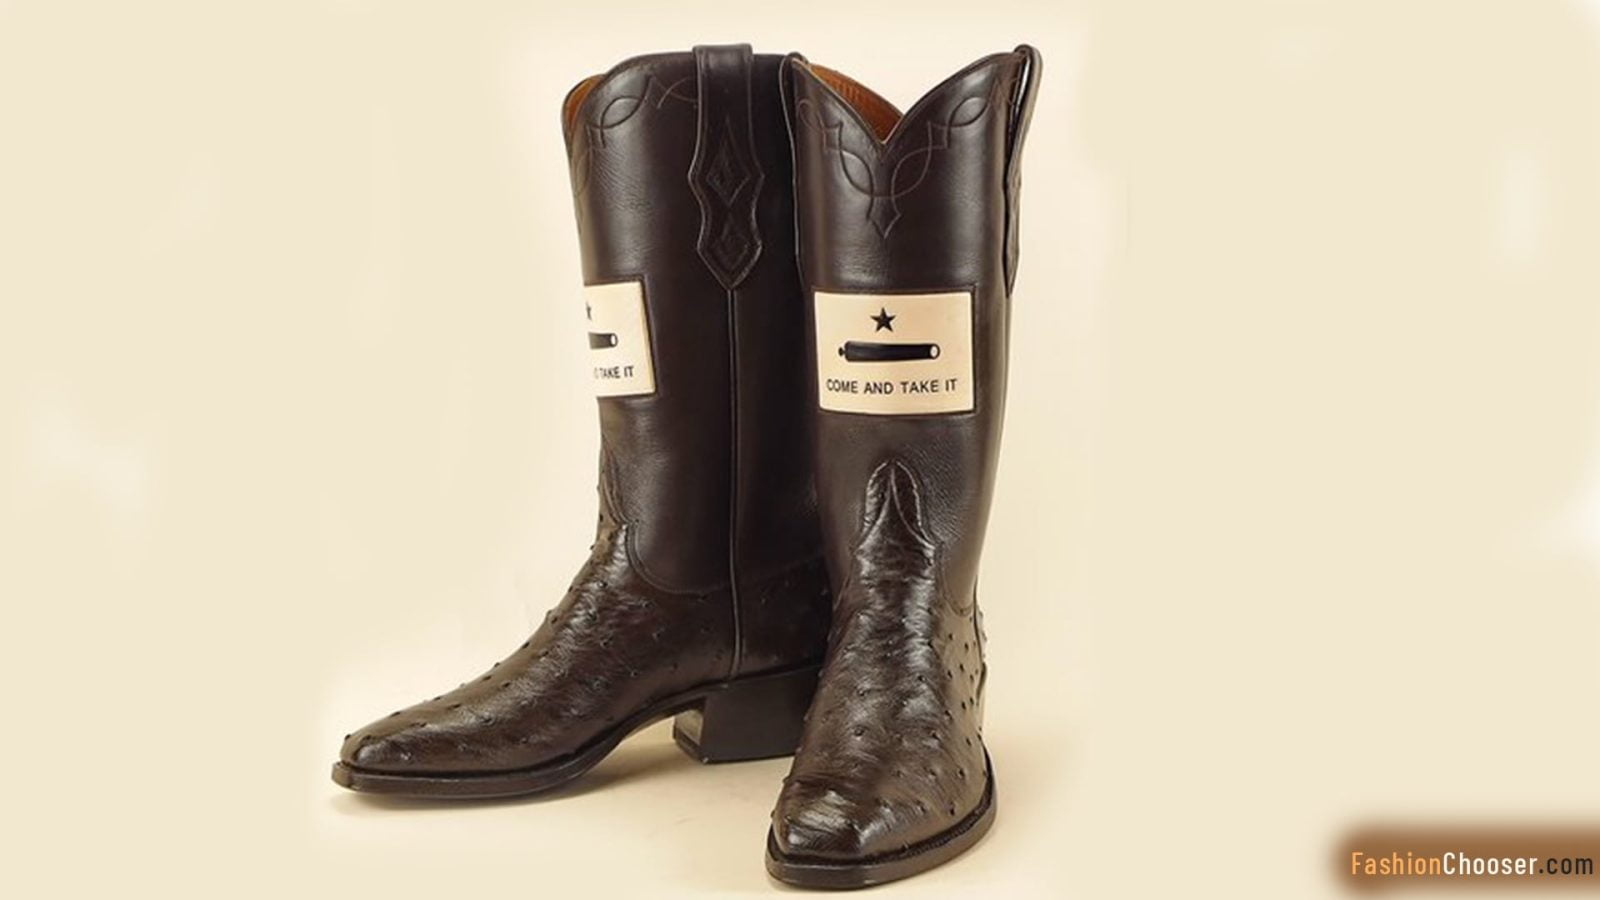 Candela Boot Co comfortable cowboy boots brand